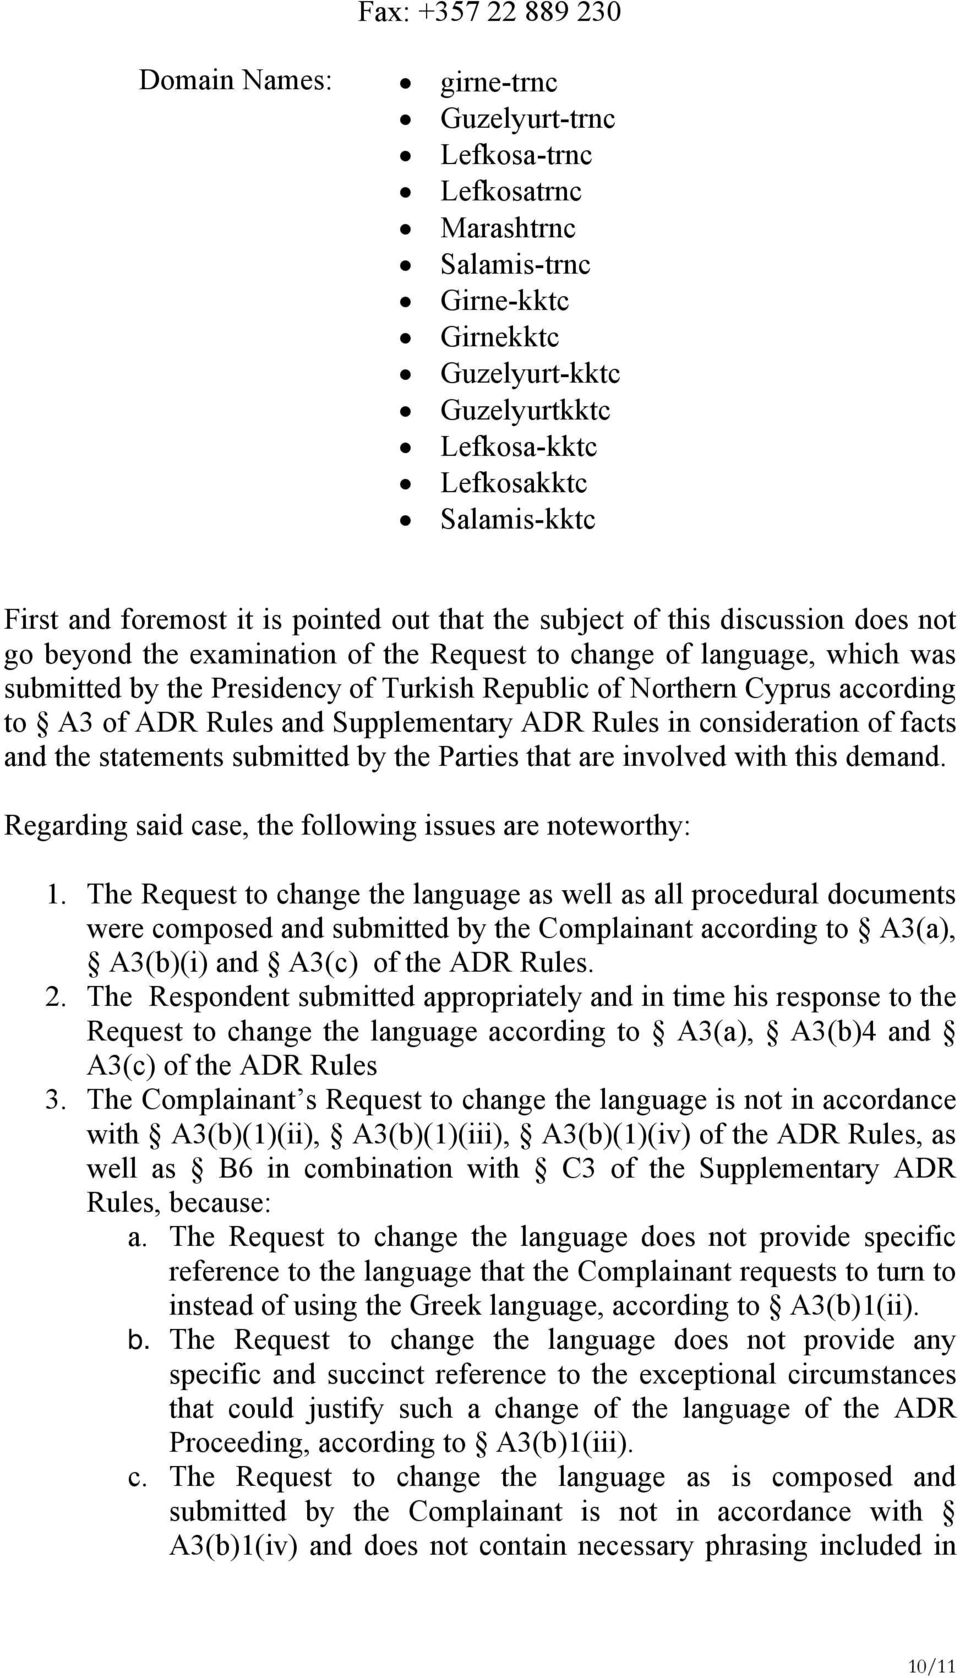 Republic of Northern Cyprus according to A3 of ADR Rules and Supplementary ADR Rules in consideration of facts and the statements submitted by the Parties that are involved with this demand.